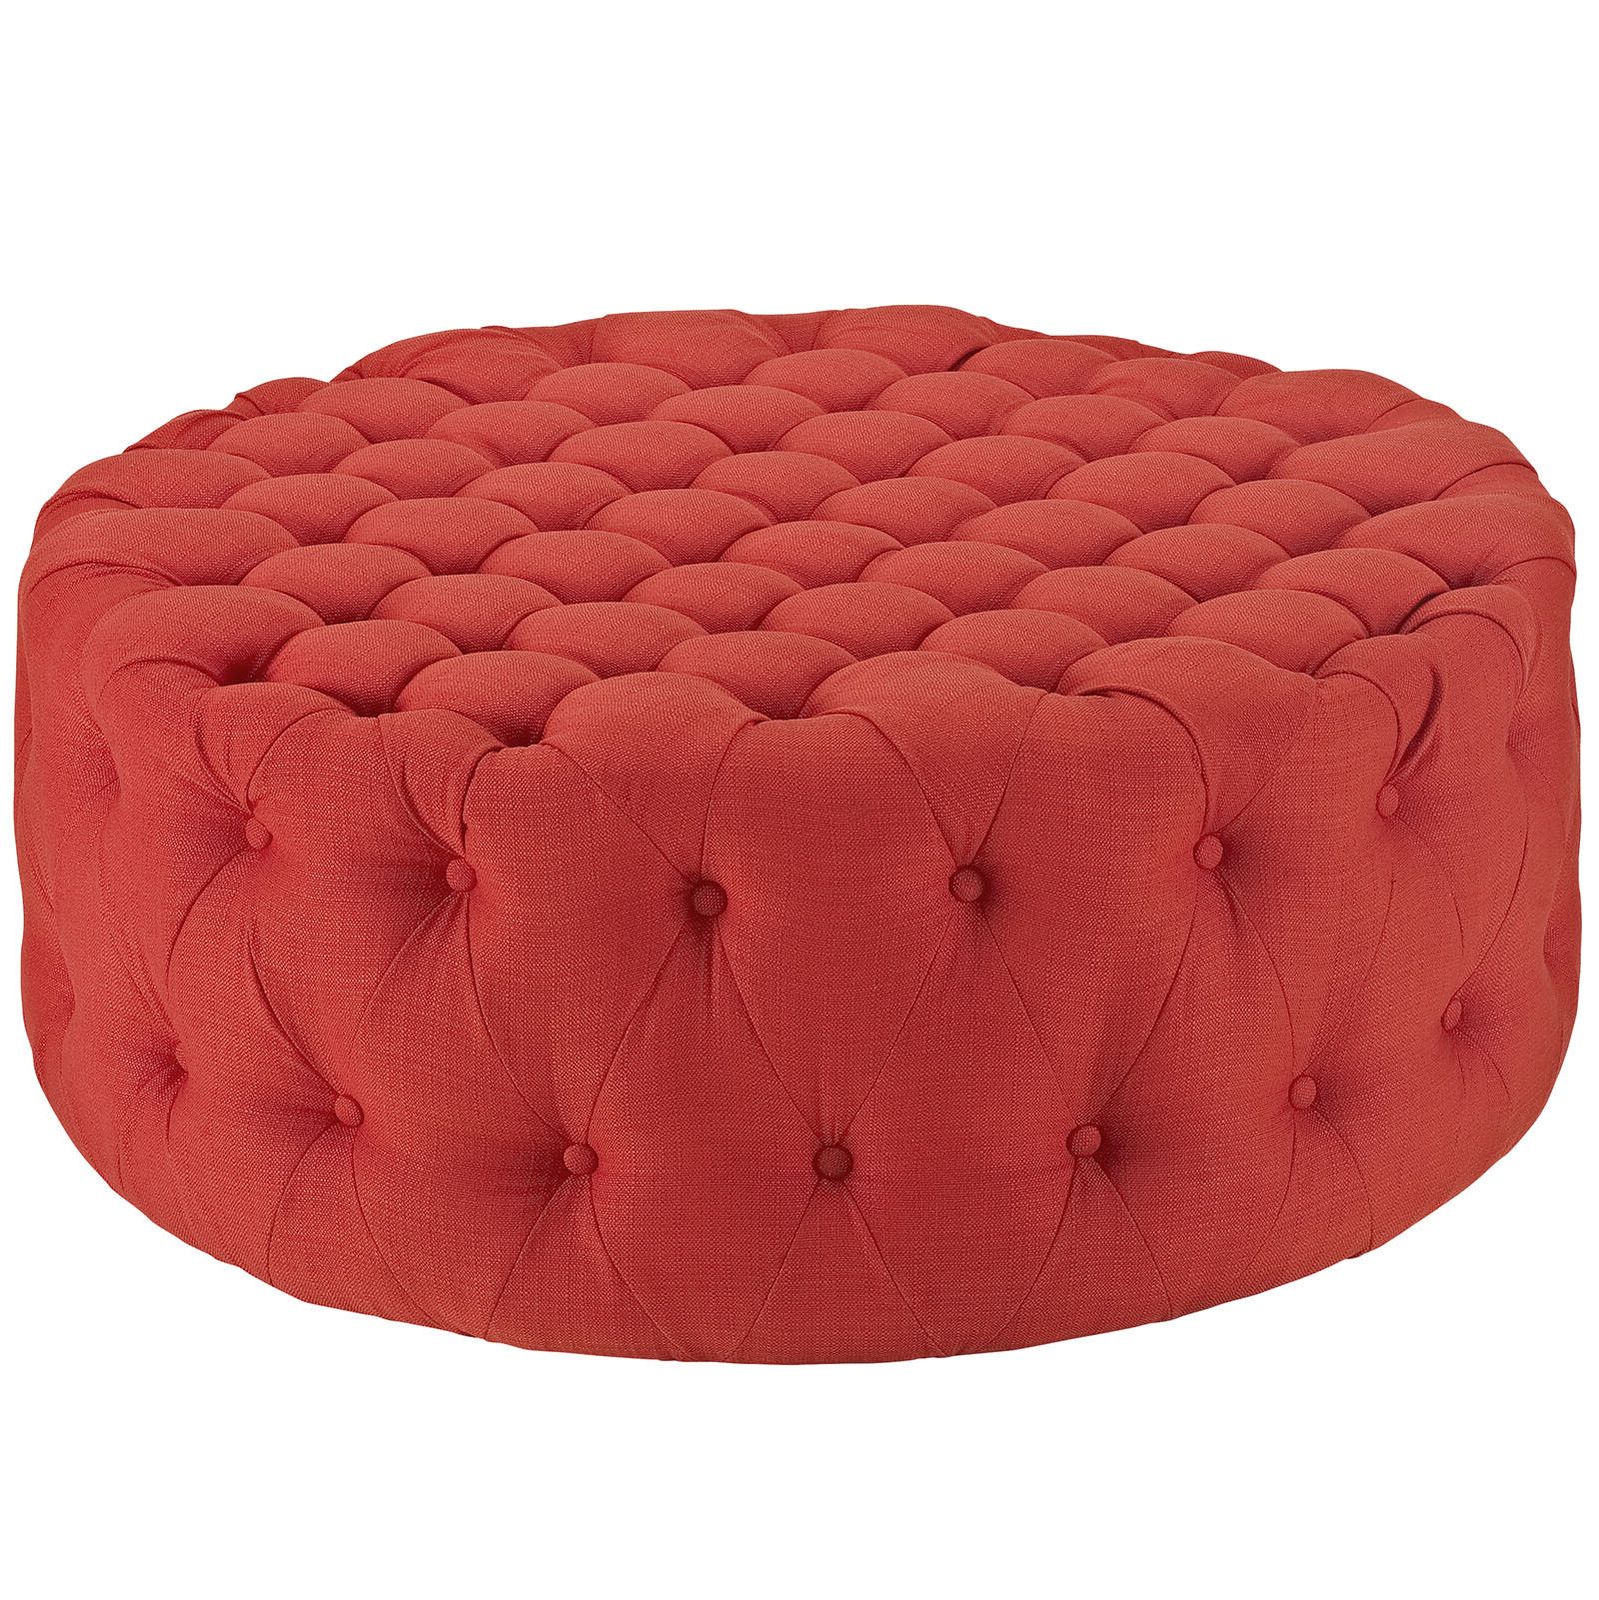 Button Tufted Fabric Upholstered Round Ottoman In Atomic Red With Regard To Latest Tufted Fabric Ottomans (View 1 of 10)